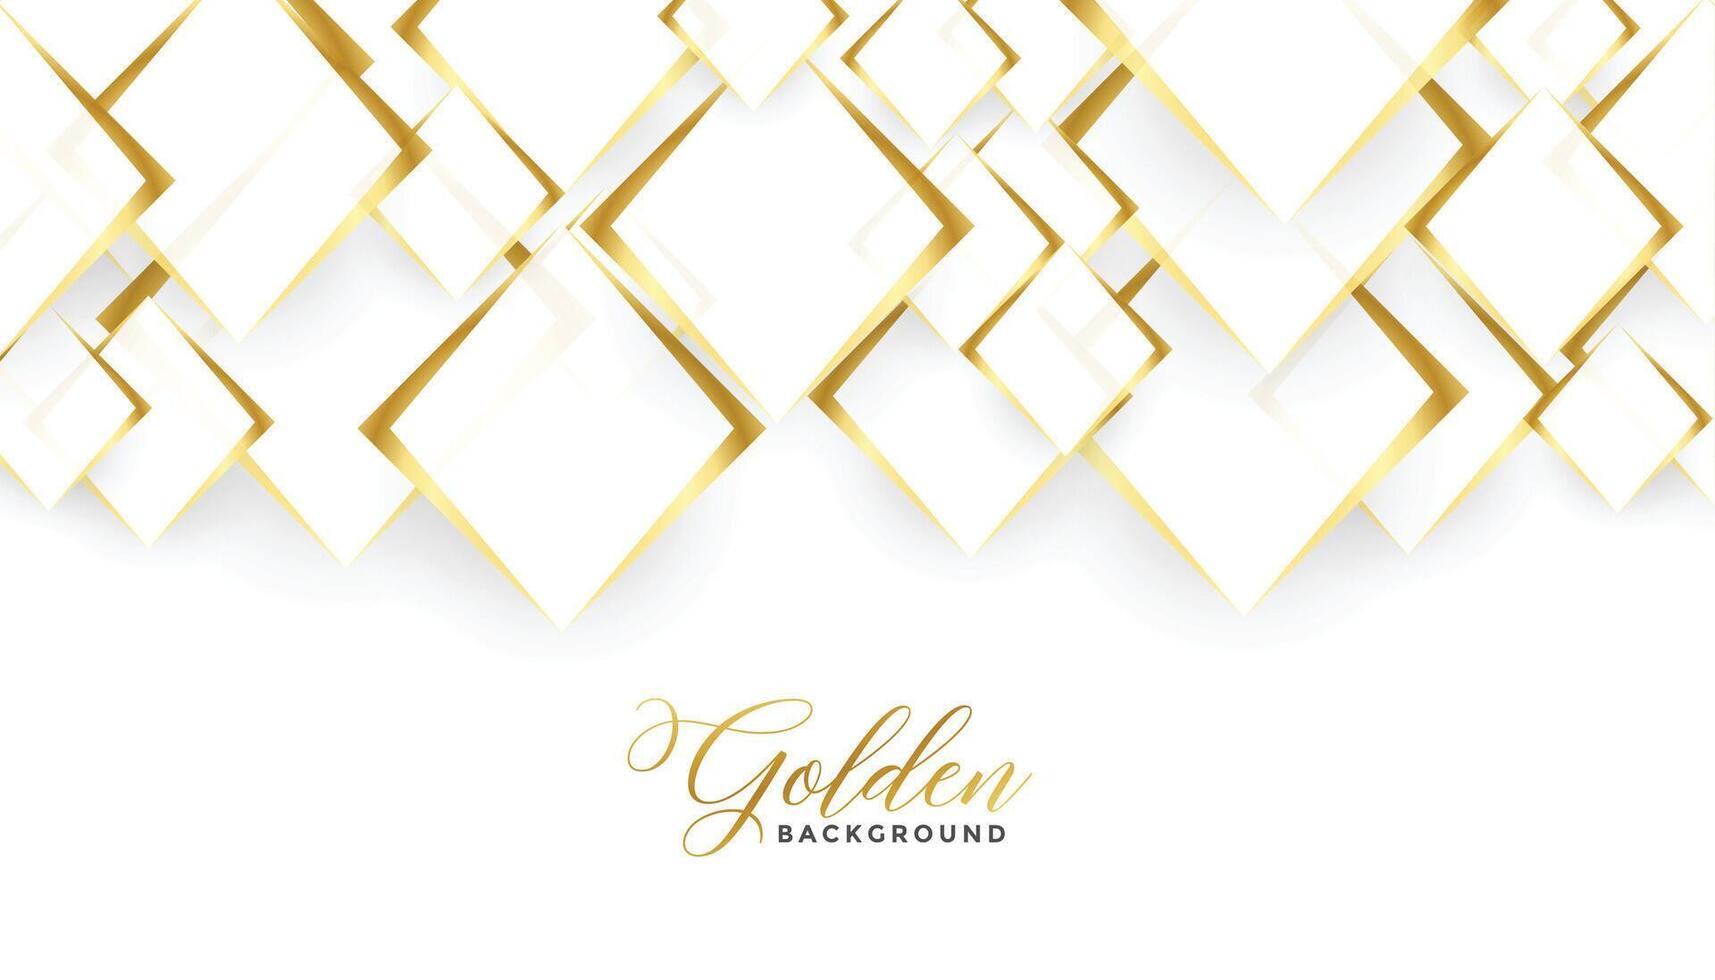 diamond shapes golden and white background design vector